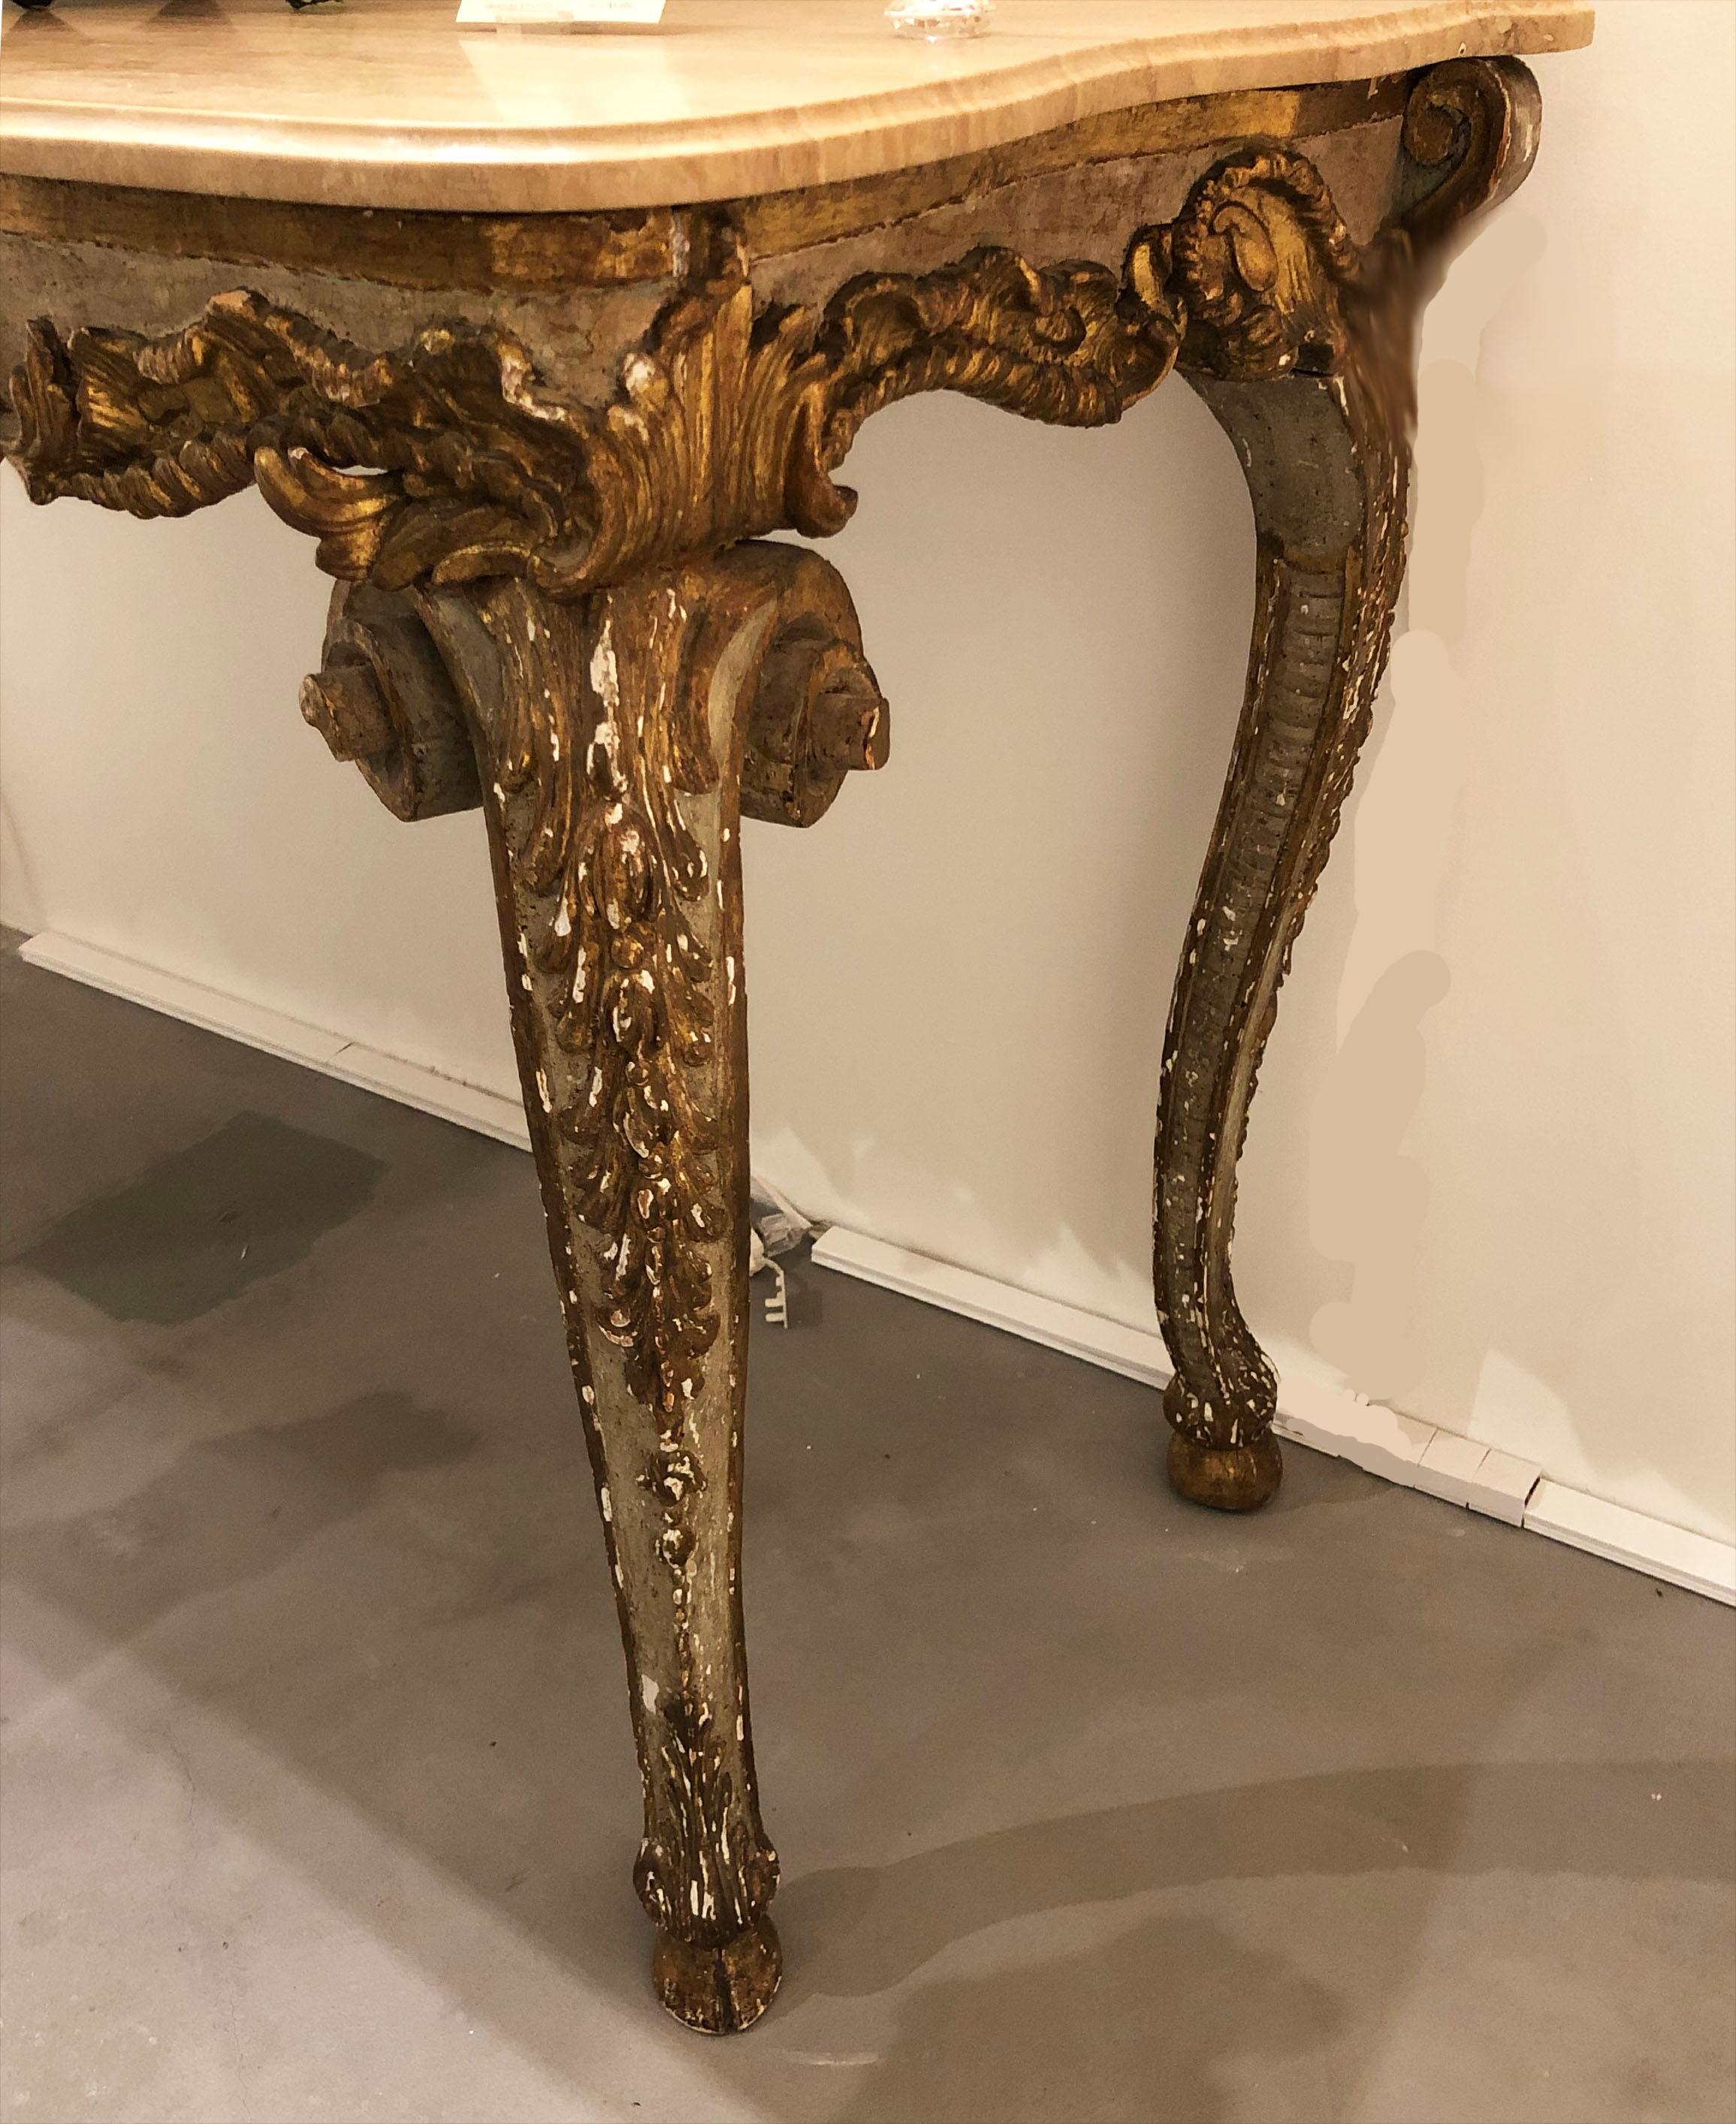 Rococo Giltwood Console Table with Cabriole Legs In Good Condition For Sale In Larkspur, CA